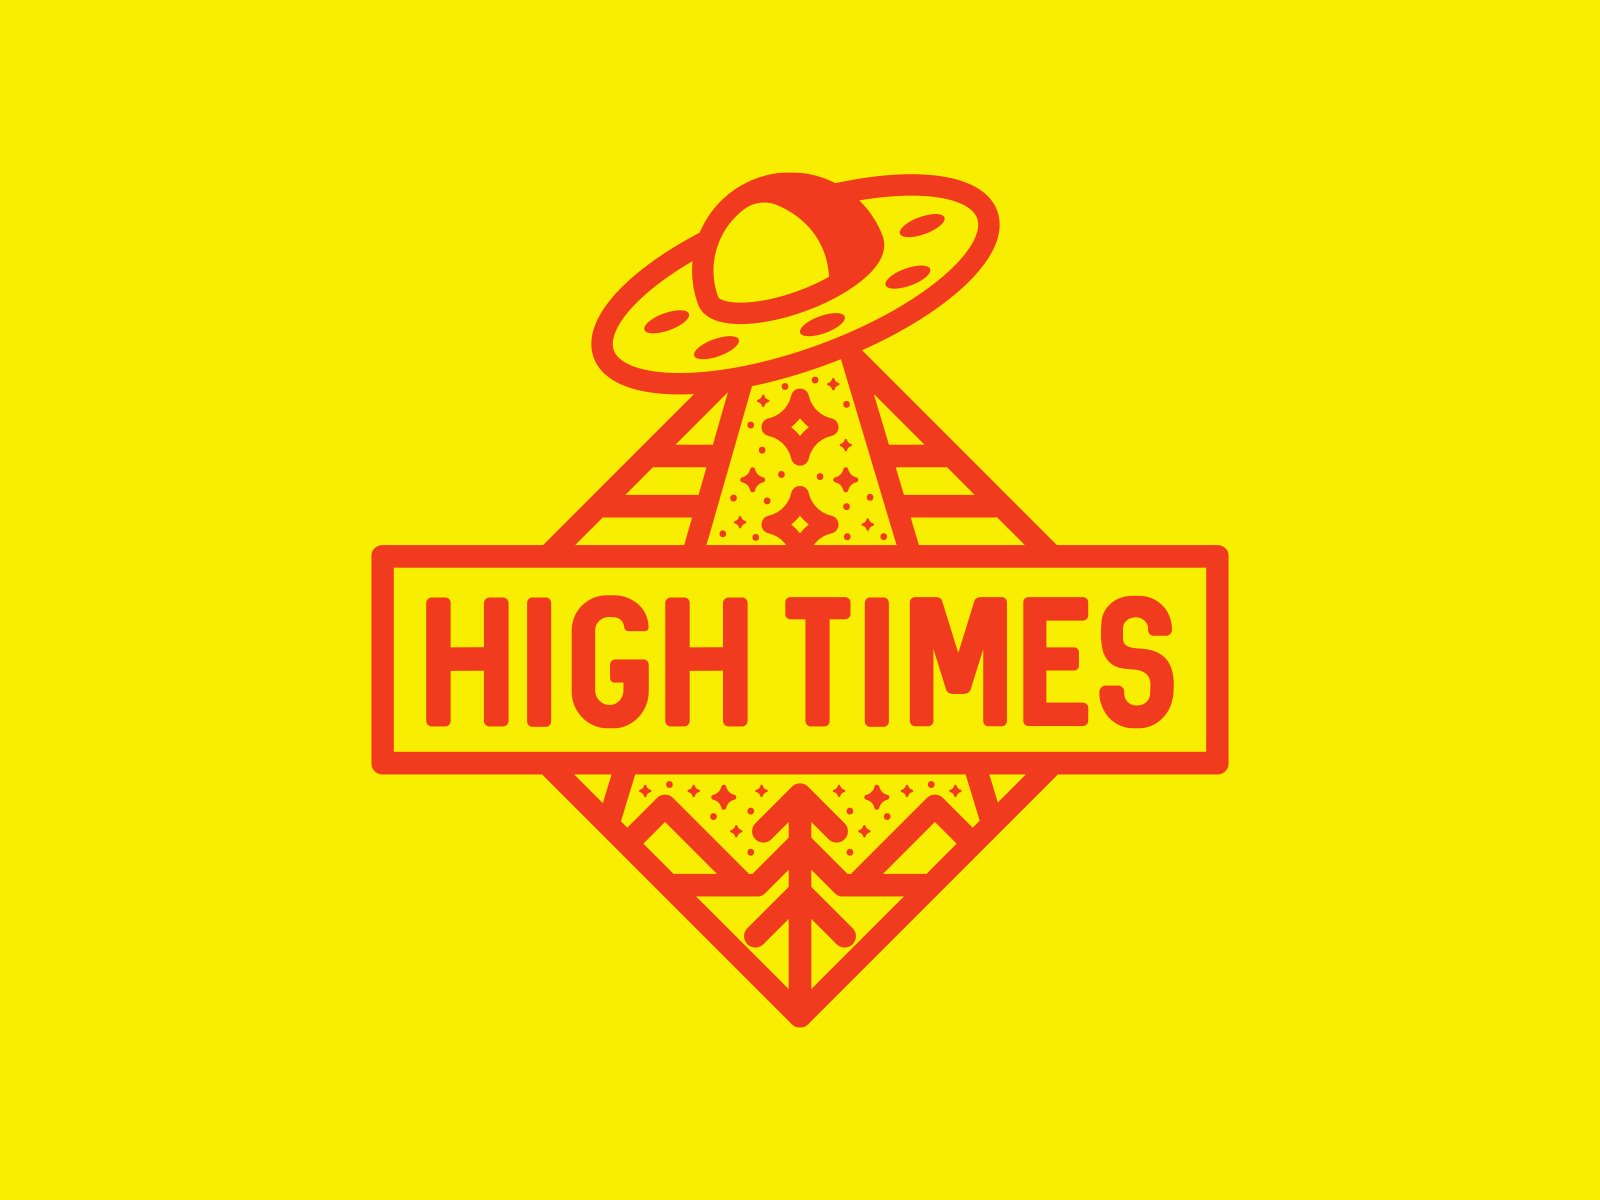 High Times 🛸 alien aliens badge badges cannabis conspiracy exploration flying saucer mounains mystery open minds parkle space spaceship stars stoner ufo ufo badge ufology weed